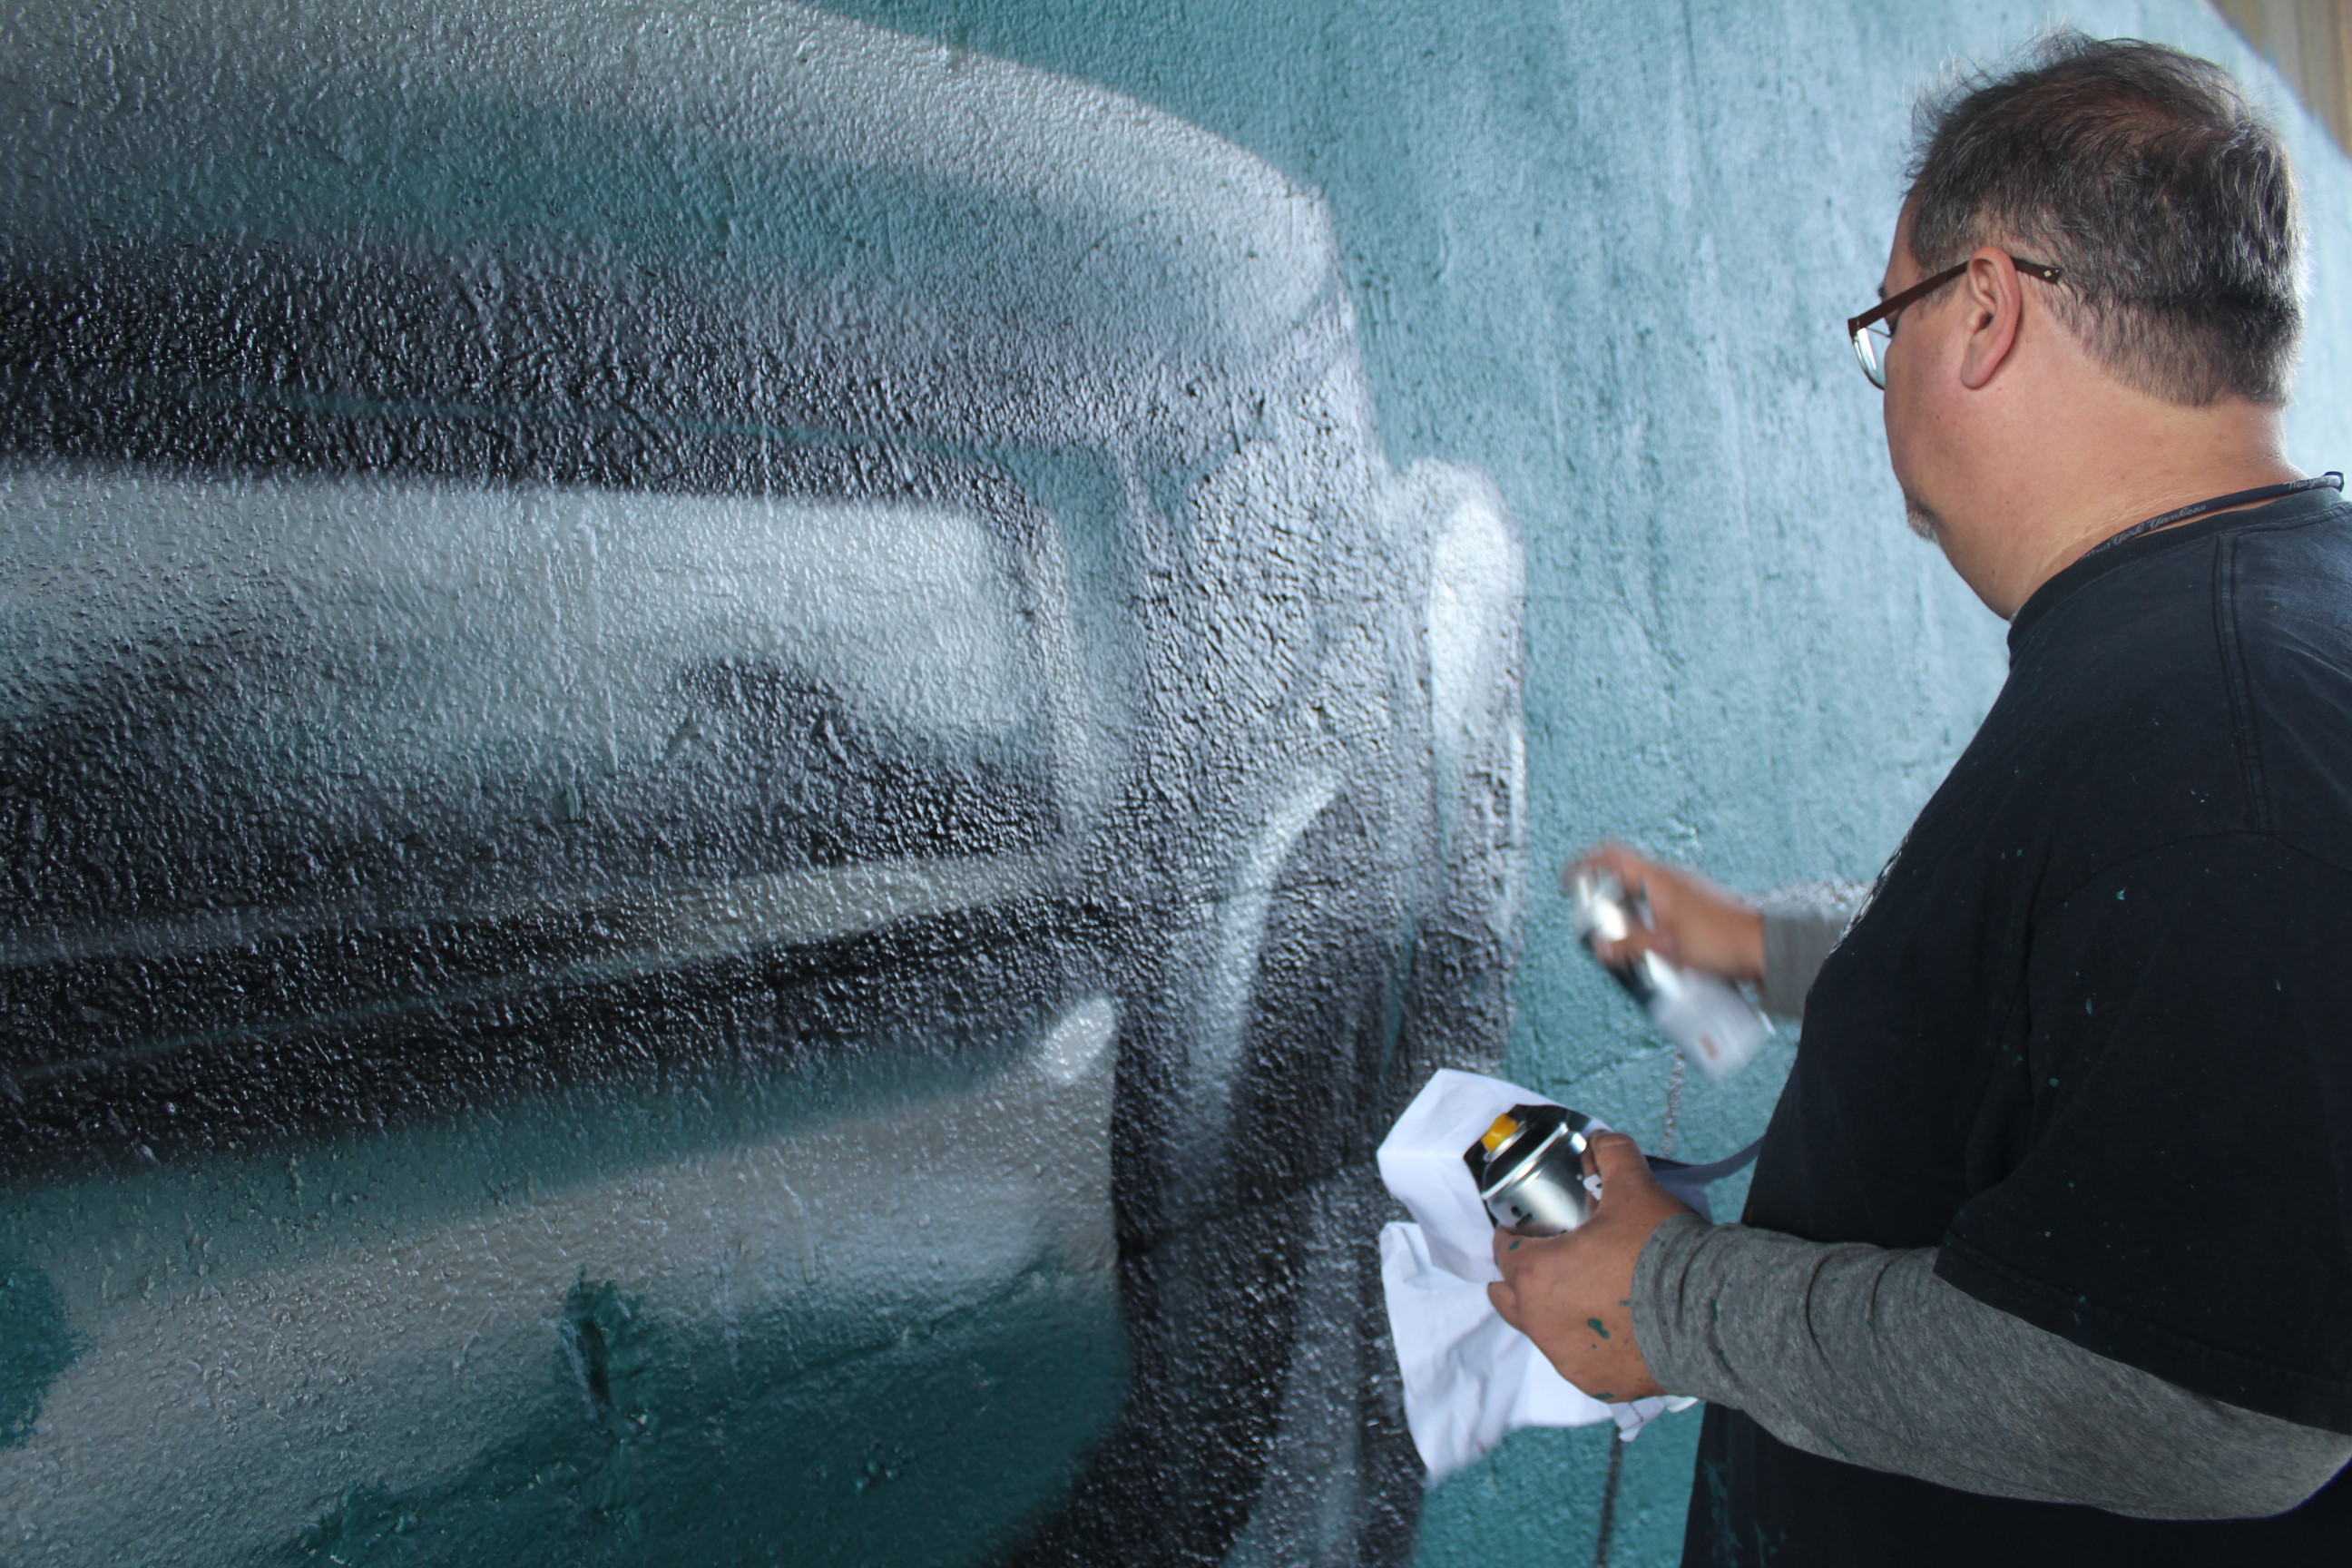 A nonprofit organization is transforming an Astoria wall with art.